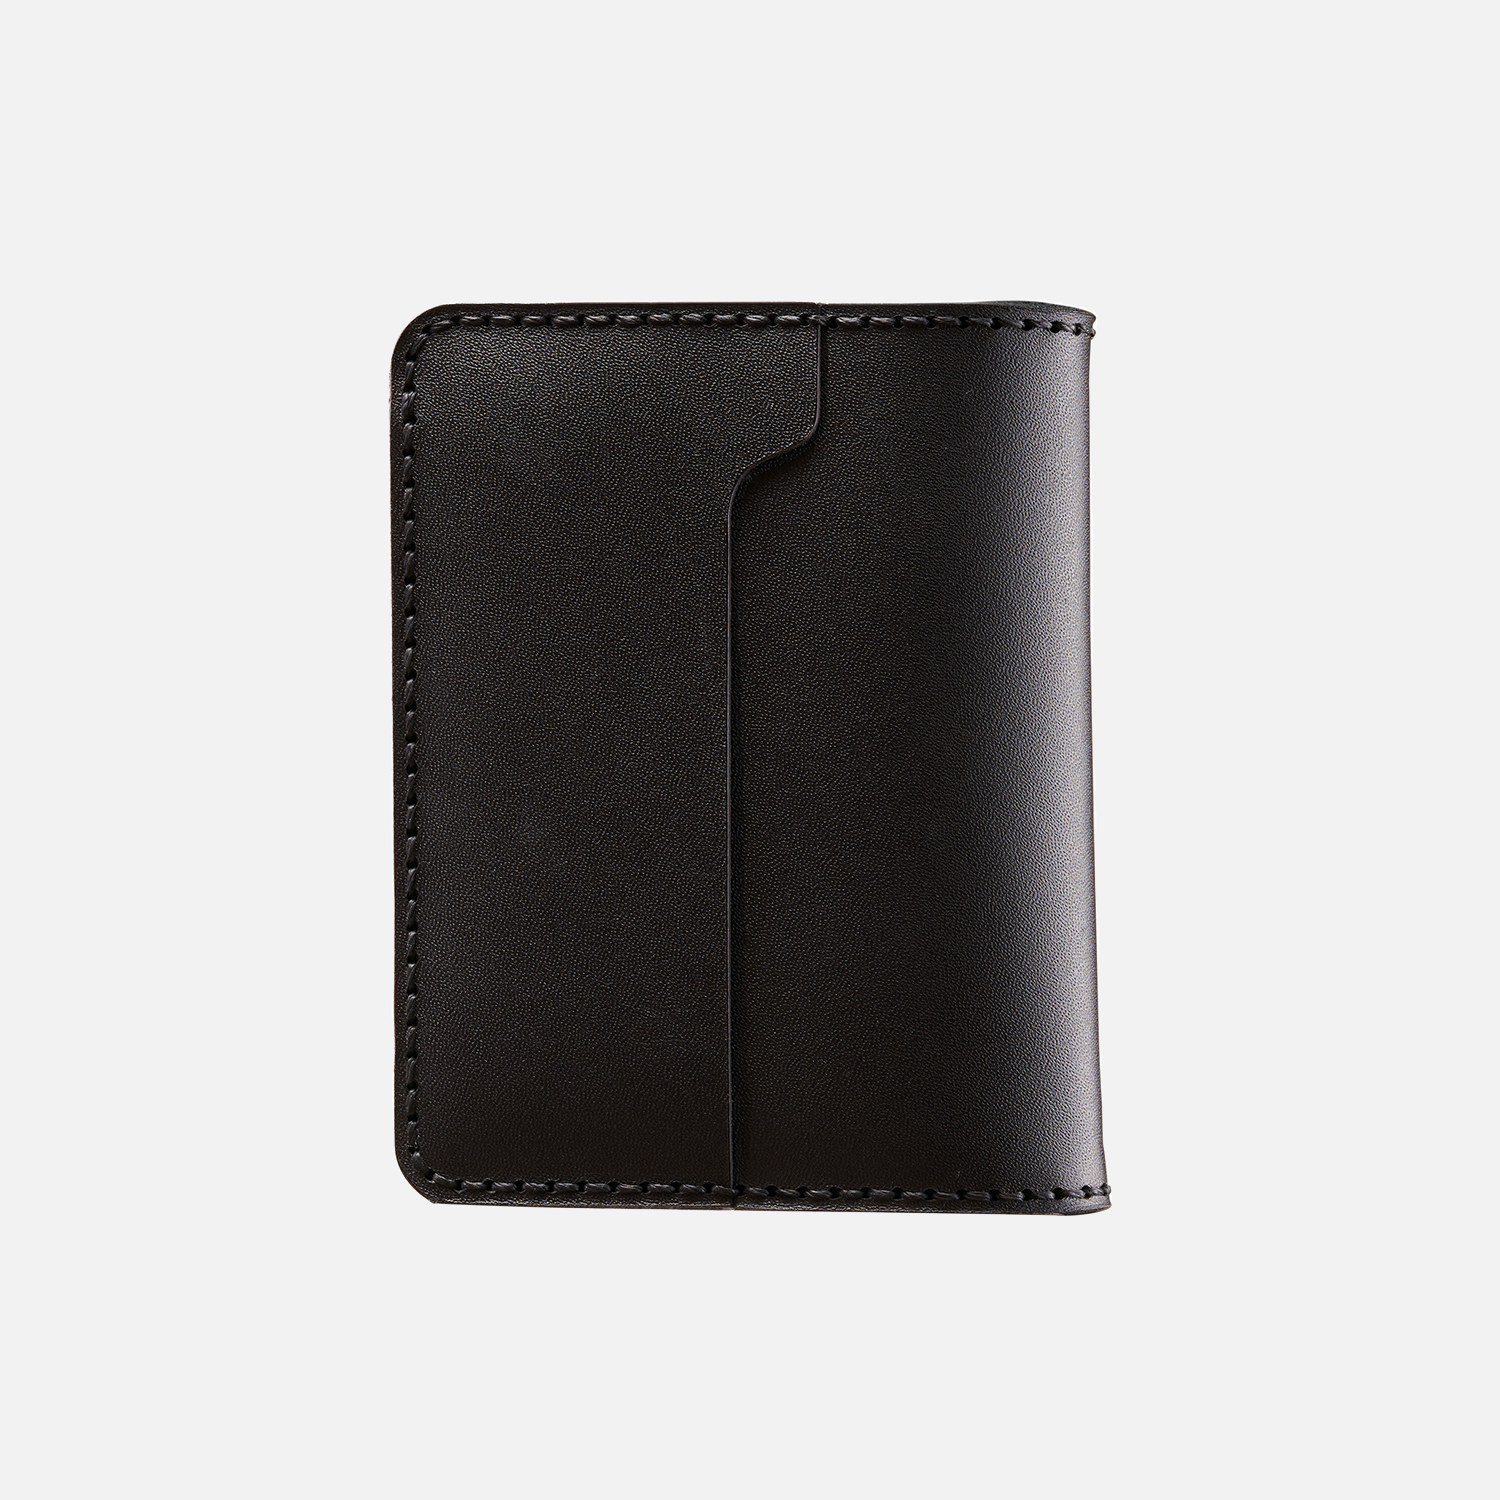 Black leather bifold wallet isolated on white background.